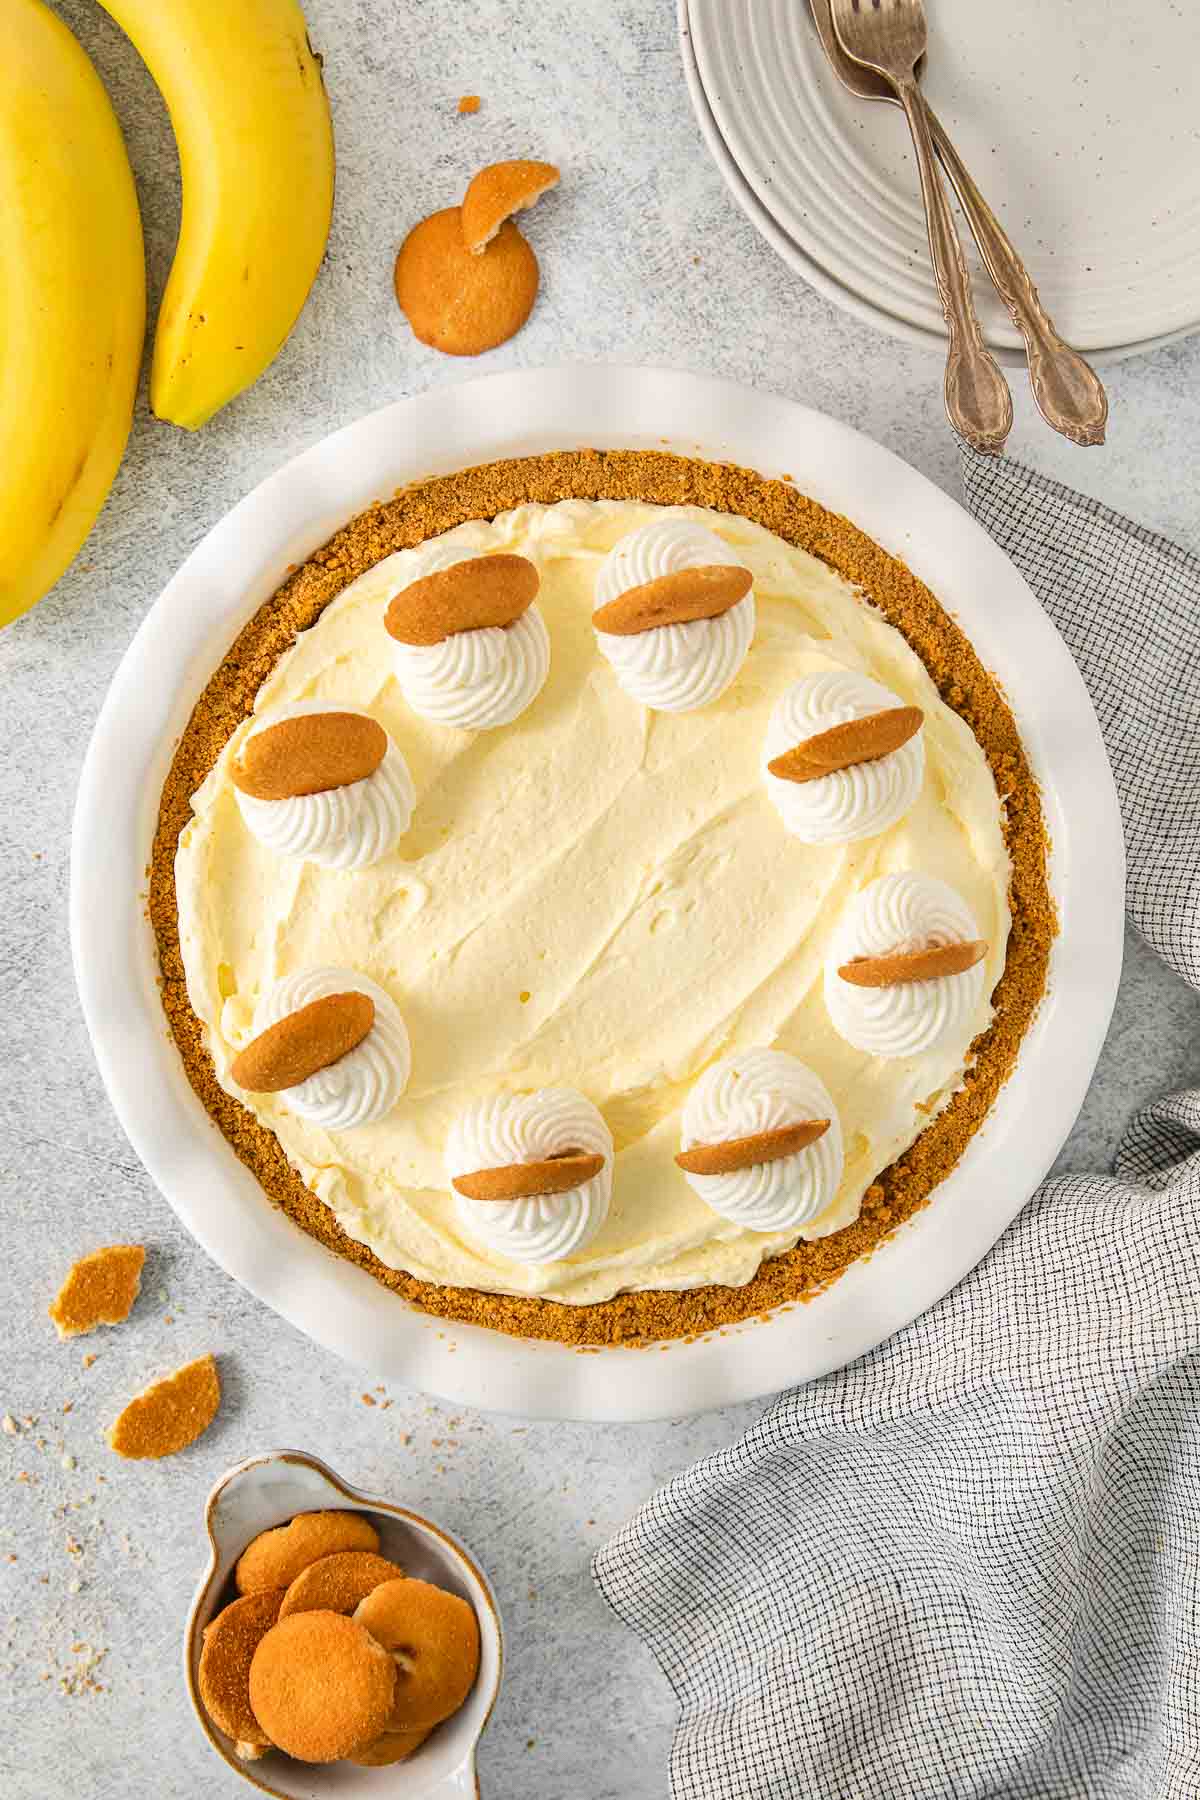 Banana pudding pie garnished with whipped cream and nilla wafers.